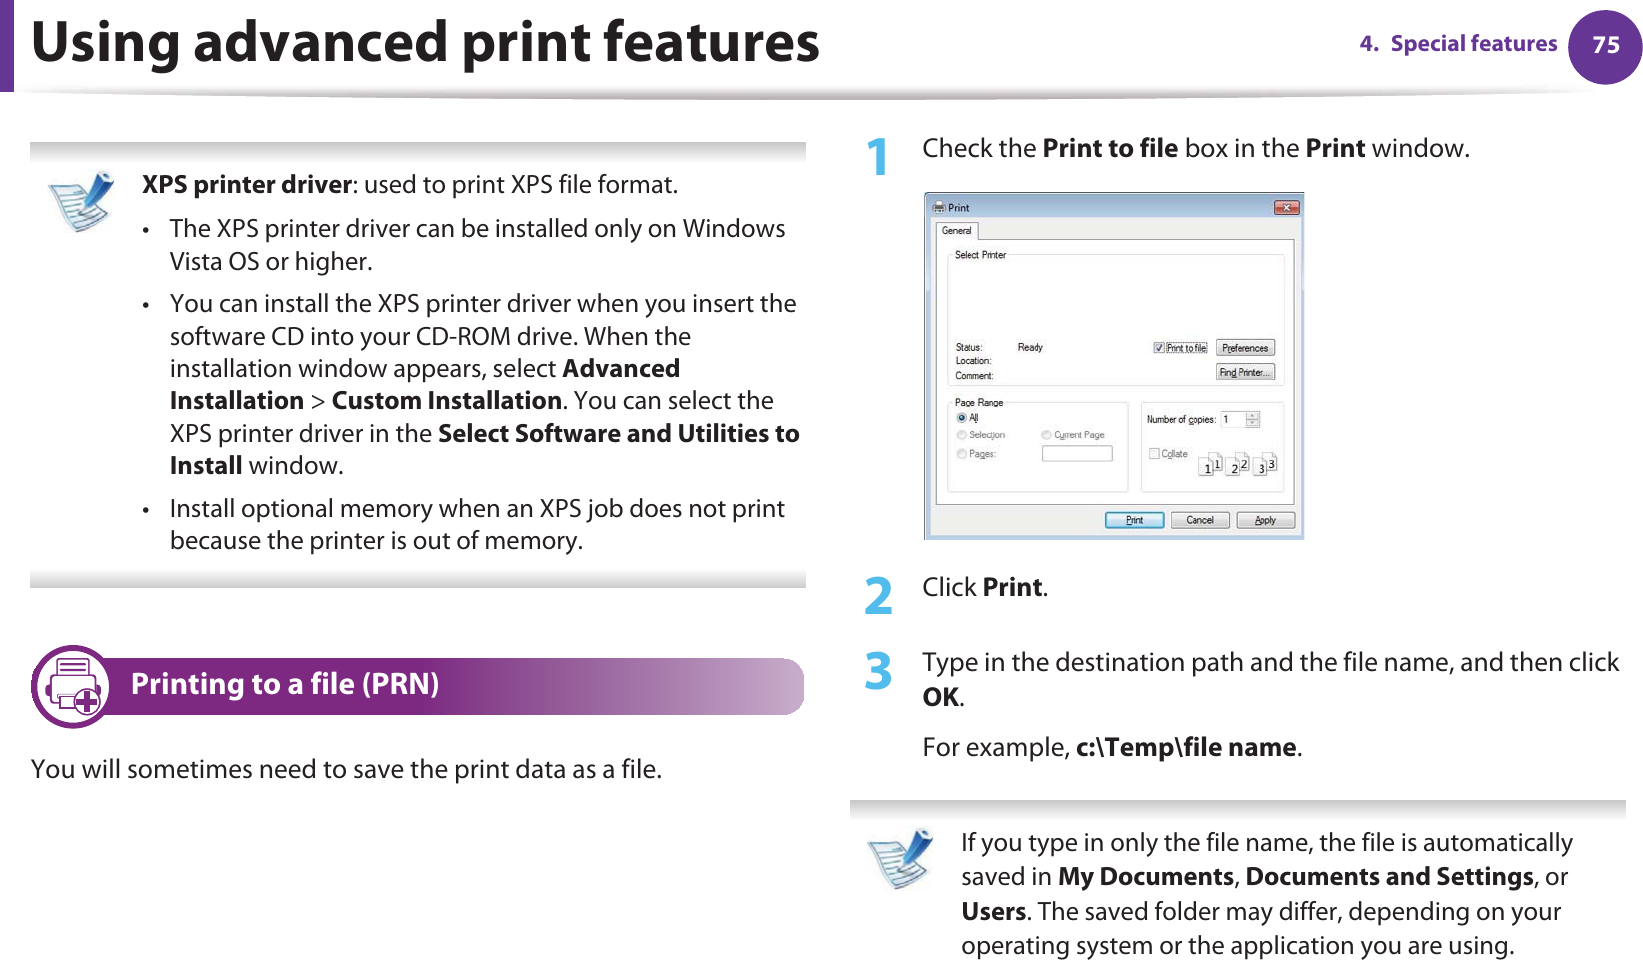 754. Special featuresUsing advanced print features XPS printer driver: used to print XPS file format. • The XPS printer driver can be installed only on Windows Vista OS or higher.• You can install the XPS printer driver when you insert the software CD into your CD-ROM drive. When the installation window appears, select Advanced Installation &gt; Custom Installation. You can select the XPS printer driver in the Select Software and Utilities to Install window.• Install optional memory when an XPS job does not print because the printer is out of memory. 1 Printing to a file (PRN)You will sometimes need to save the print data as a file. 1Check the Print to file box in the Print window.2  Click Print.3  Type in the destination path and the file name, and then click OK.For example, c:\Temp\file name. If you type in only the file name, the file is automatically saved in My Documents, Documents and Settings, or Users. The saved folder may differ, depending on your operating system or the application you are using. 